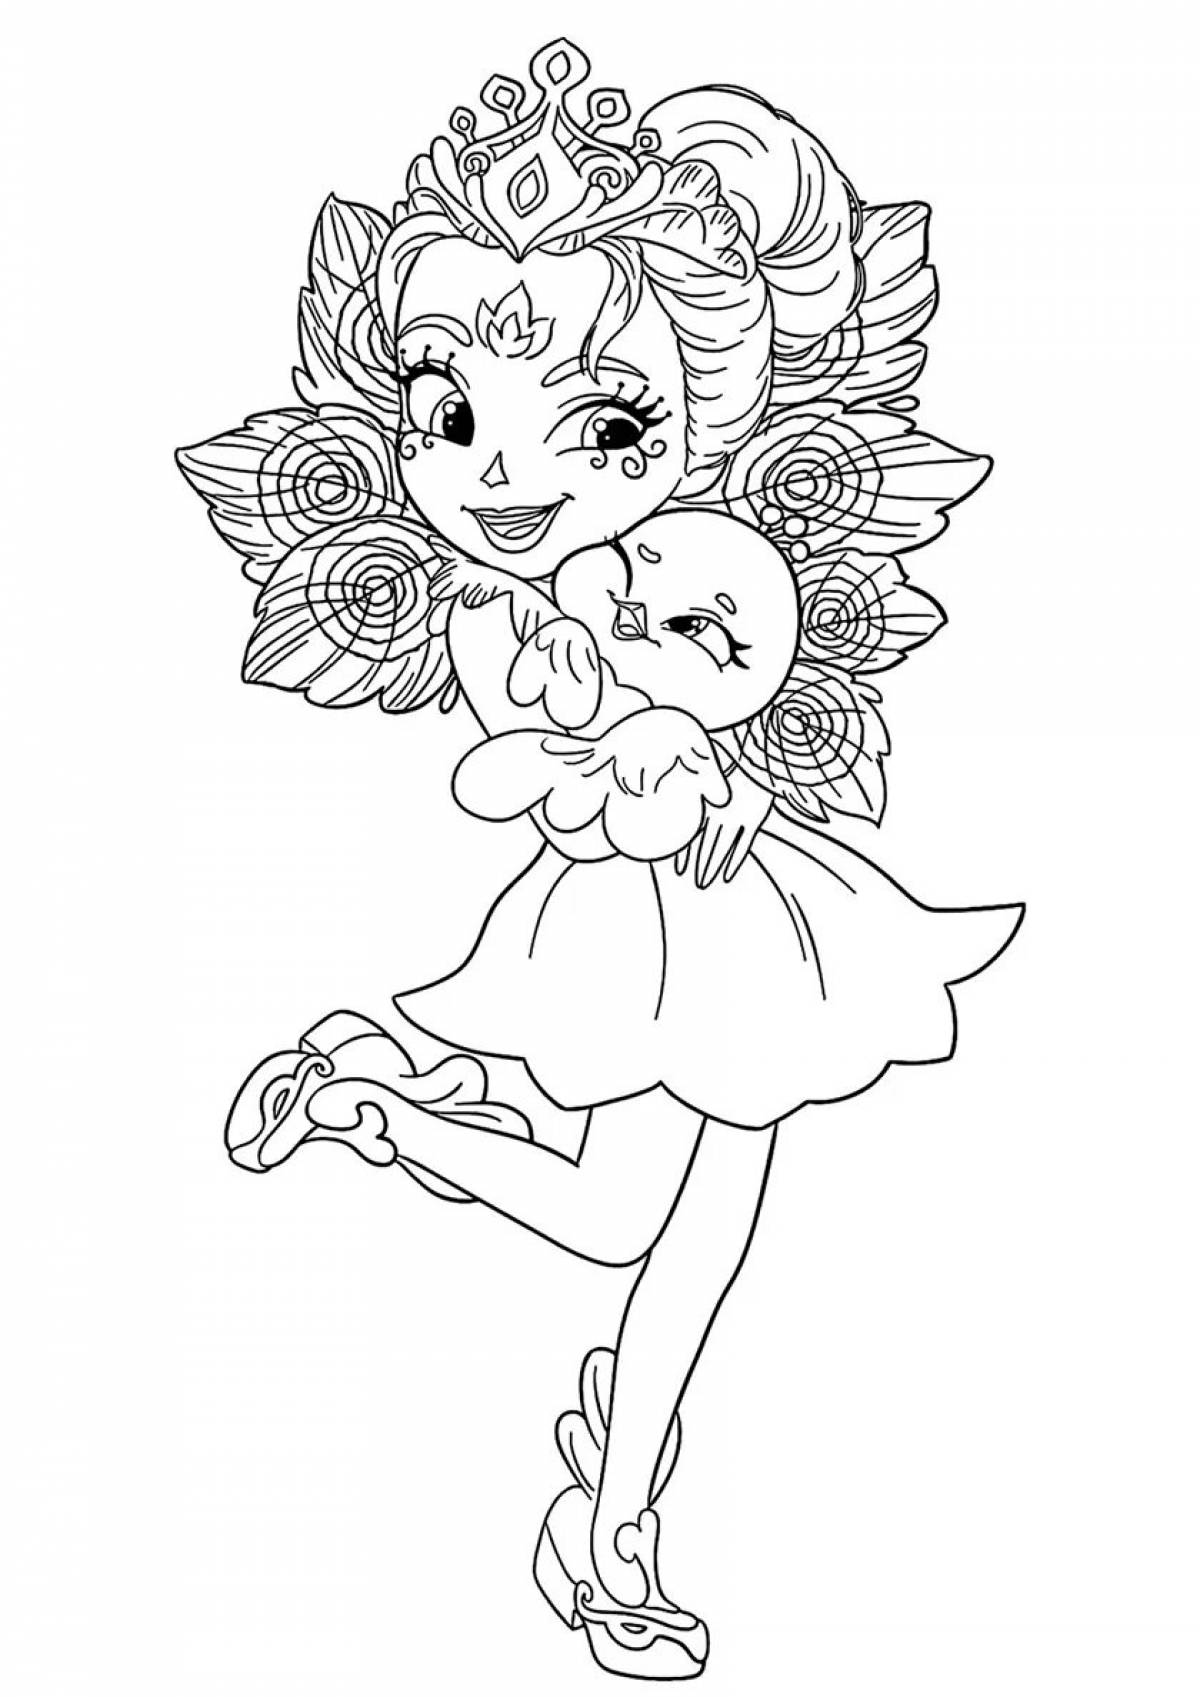 Amazing anhanchymus coloring page